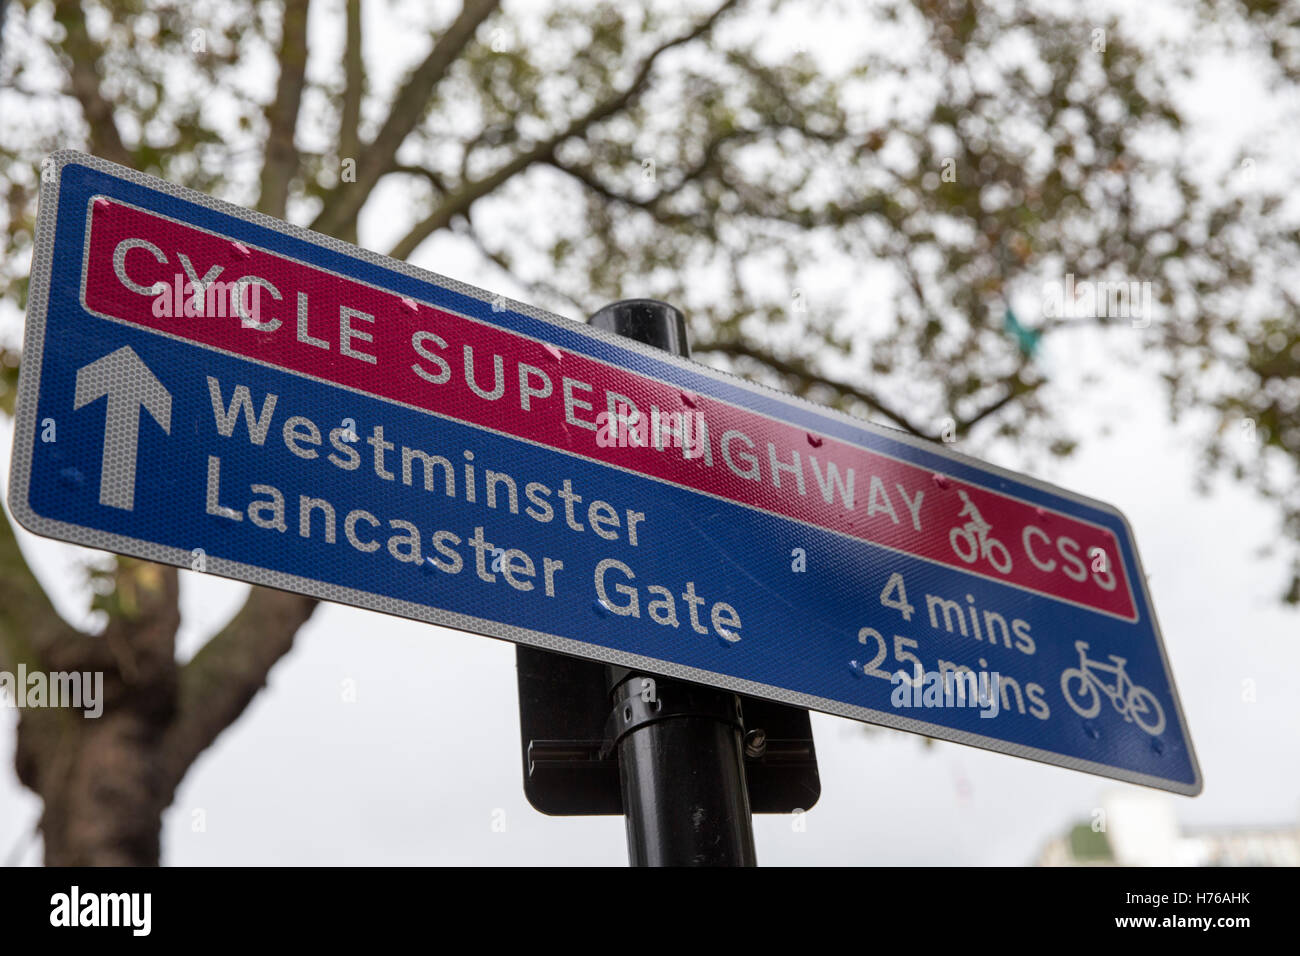 Cycle Superhighway sign, London, England, Saturday, October 01, 2016. Stock Photo